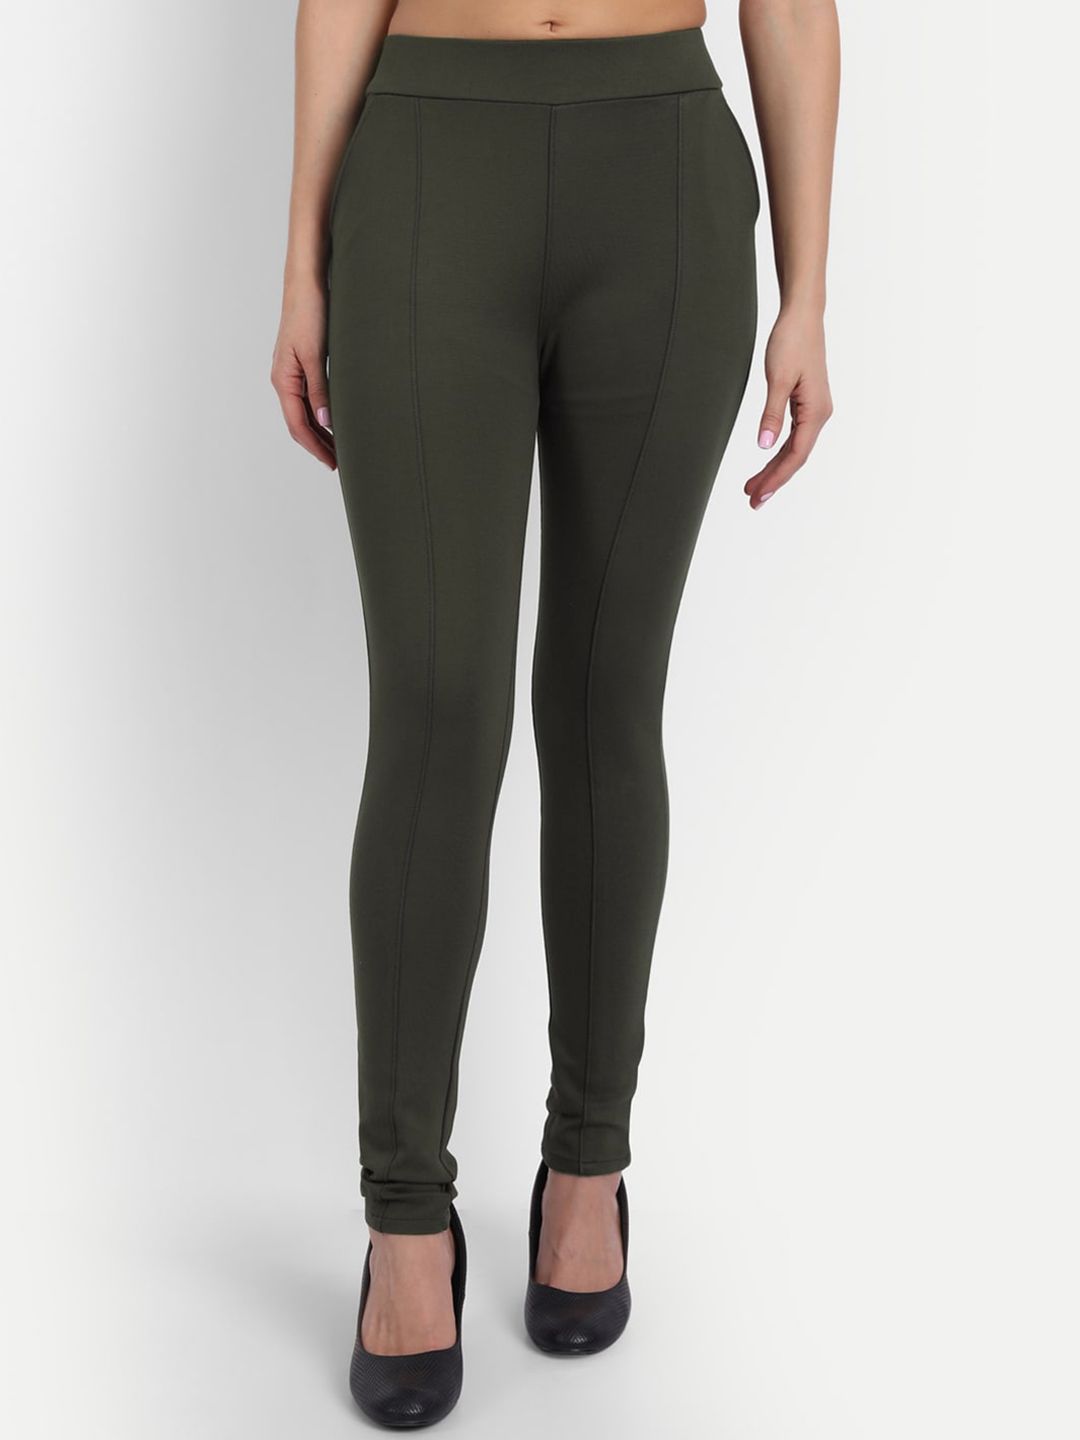 Next One Women Olive Green Slim Fit High-Rise Trousers Price in India